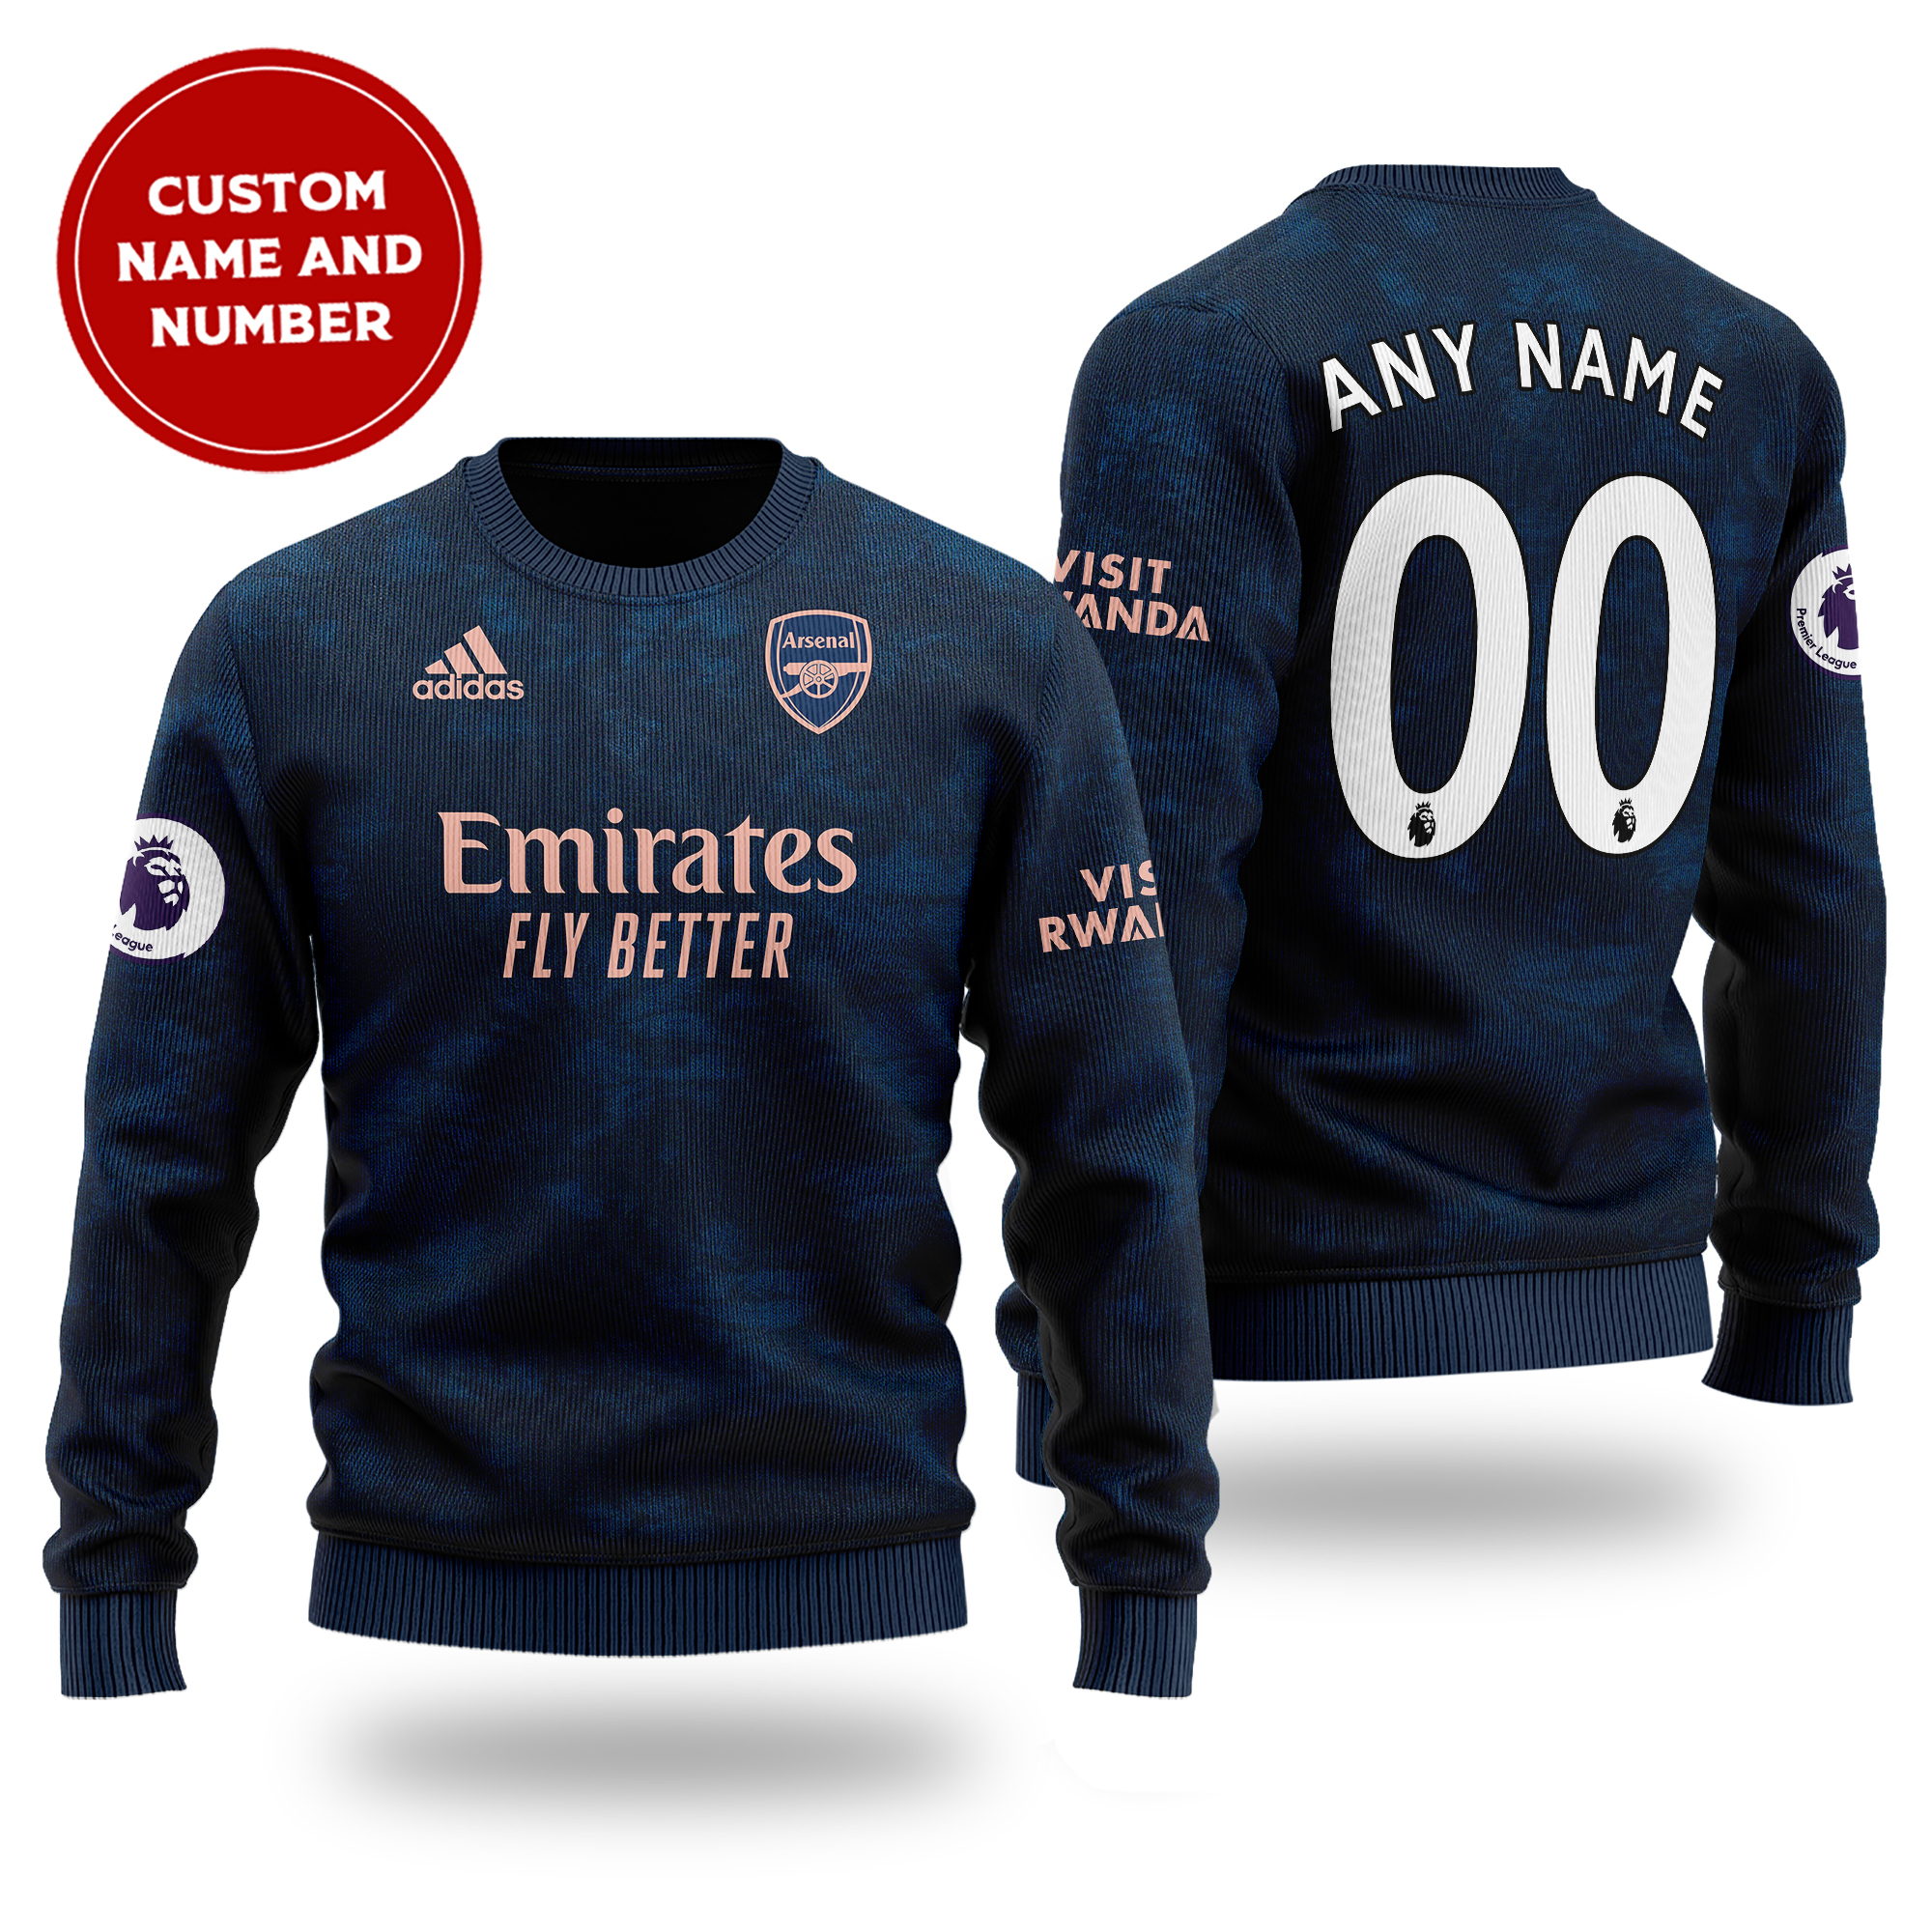 [ Amazing ] Primier League Arsenal FC third kit cutom name and number sweater – Saleoff 261121